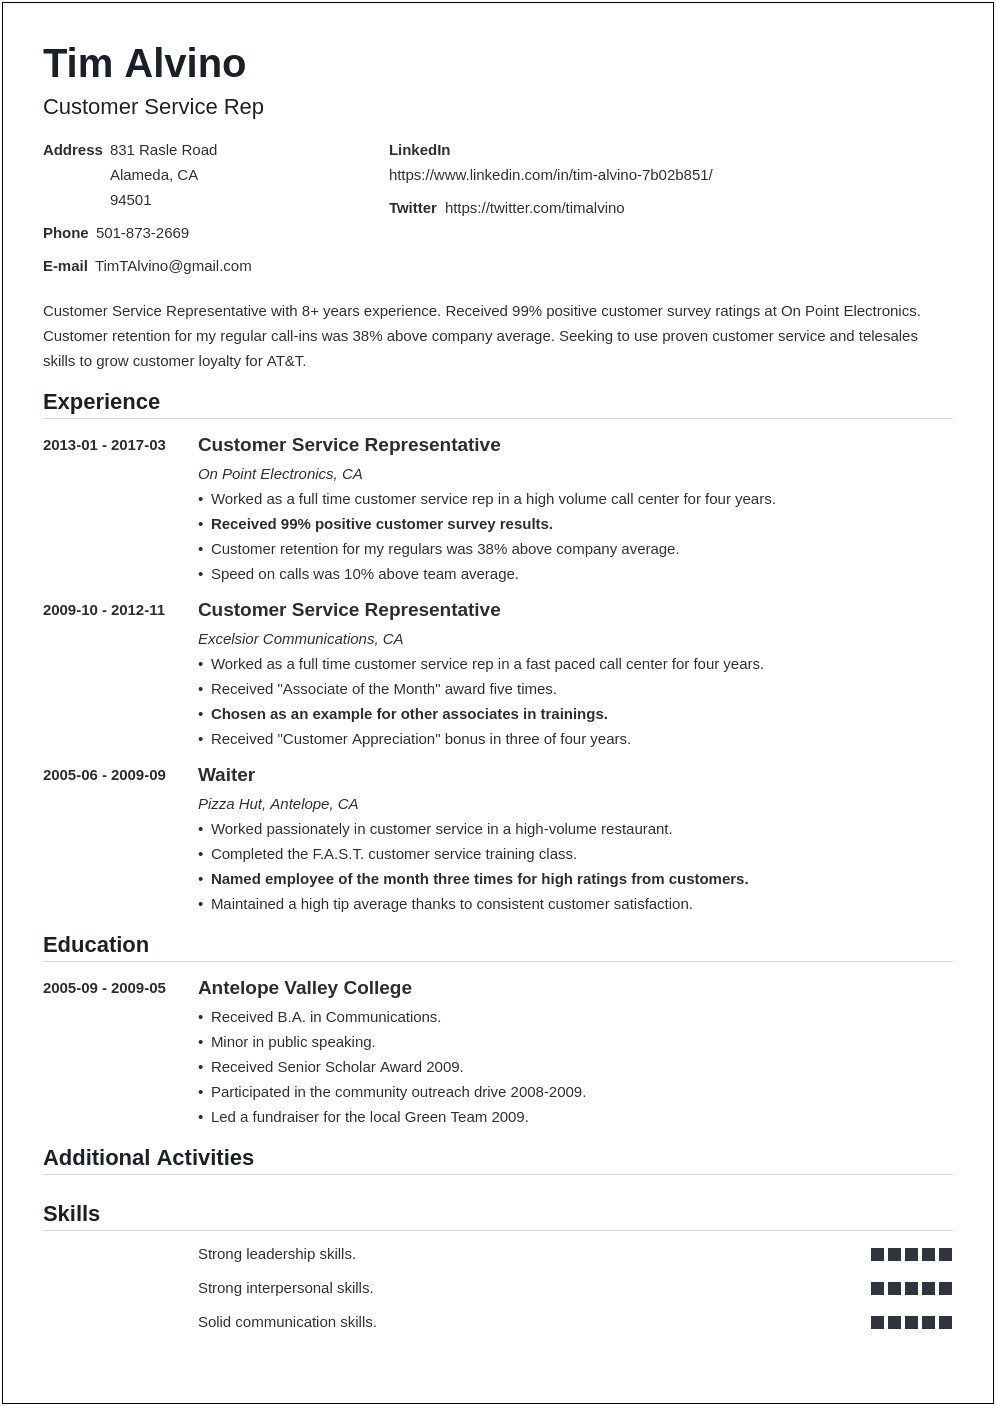 Sample Resumes For Entry Level Customer Service Jobs